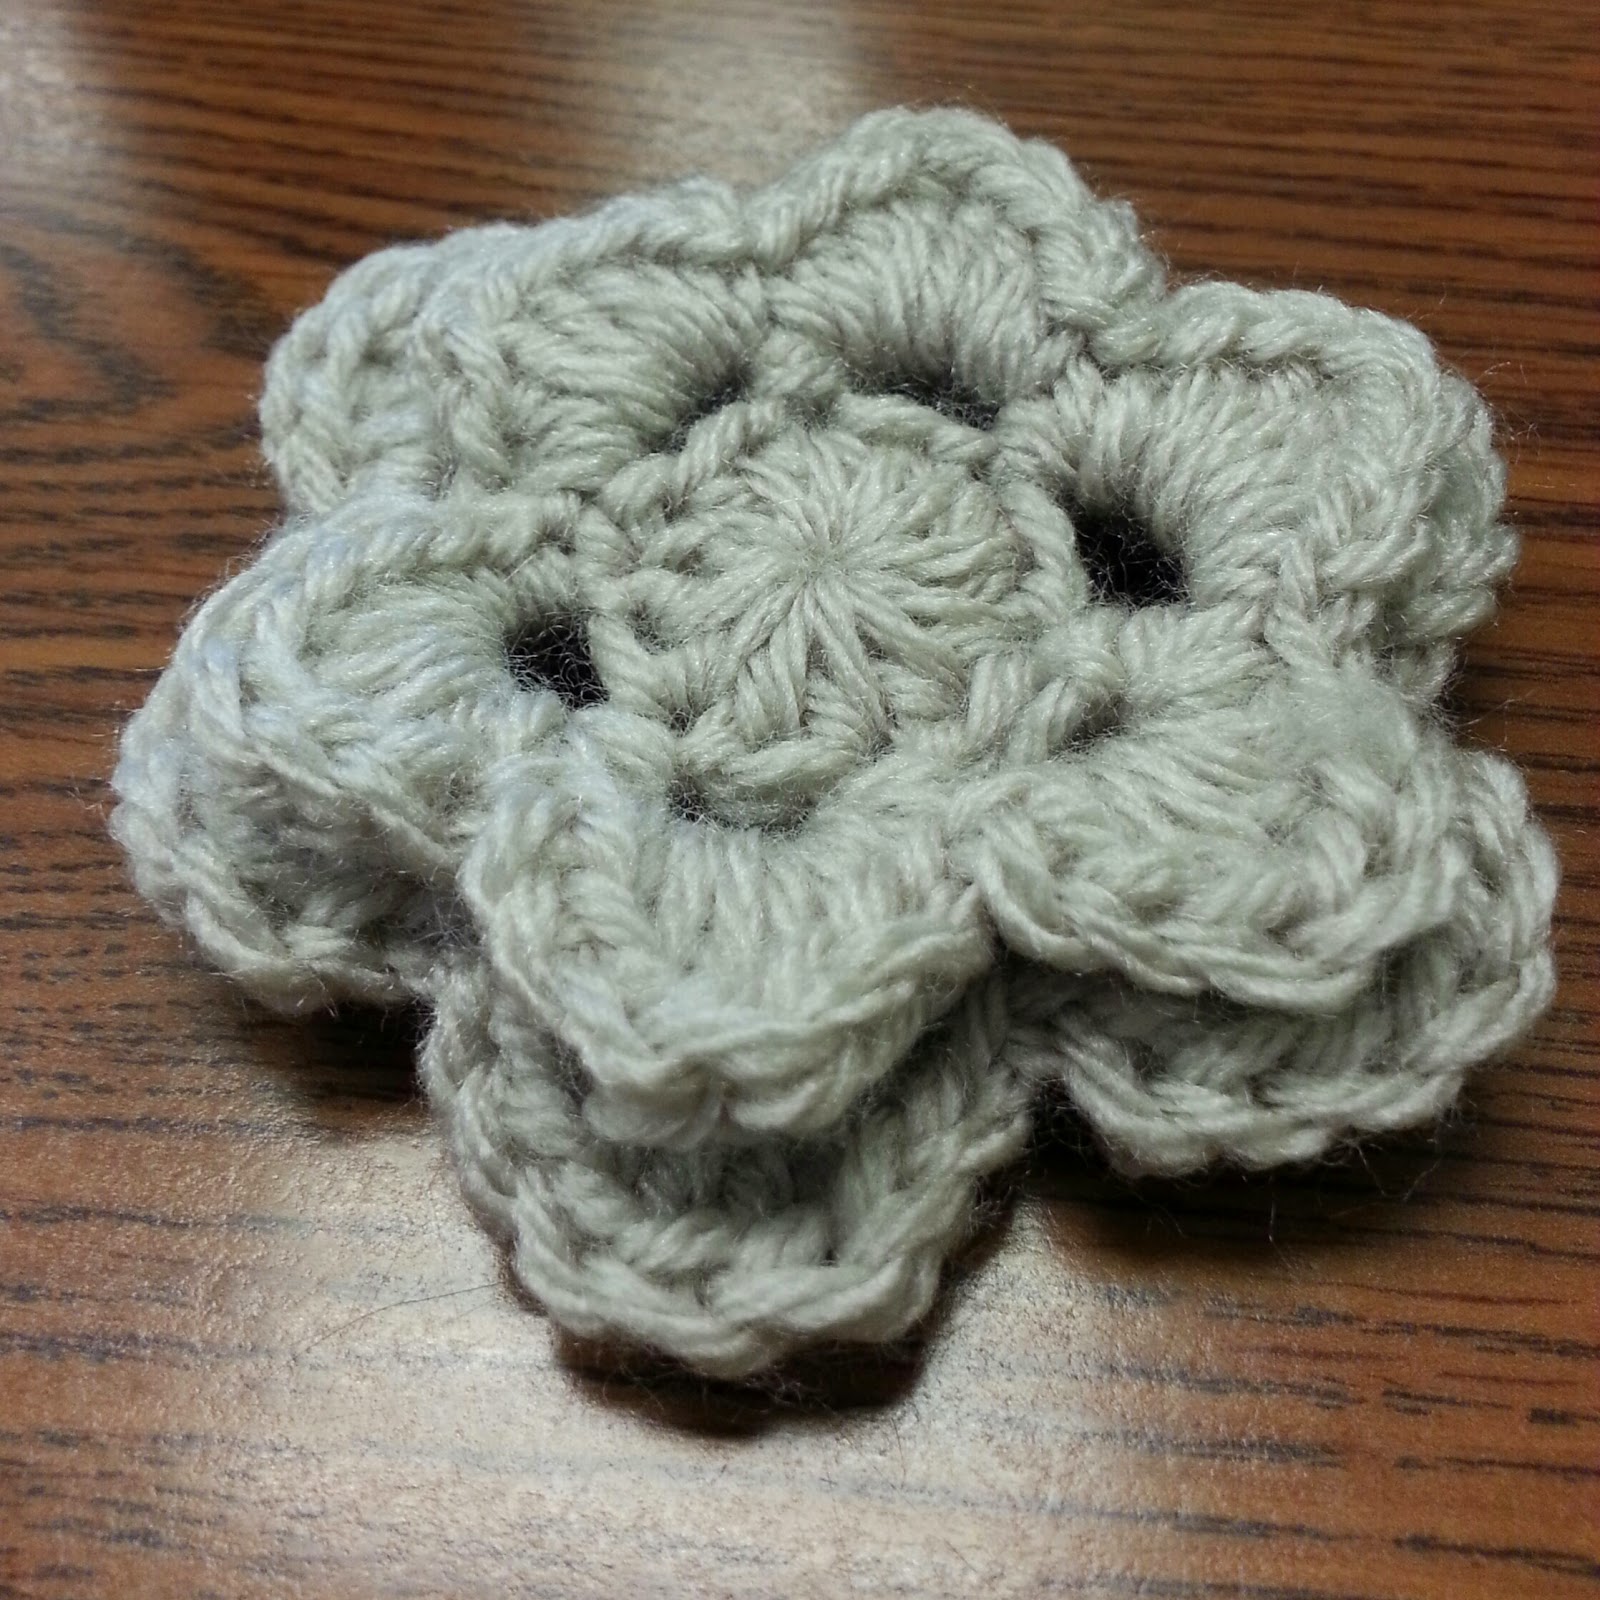 Tw-In Stitches: Removable flower - Free Pattern